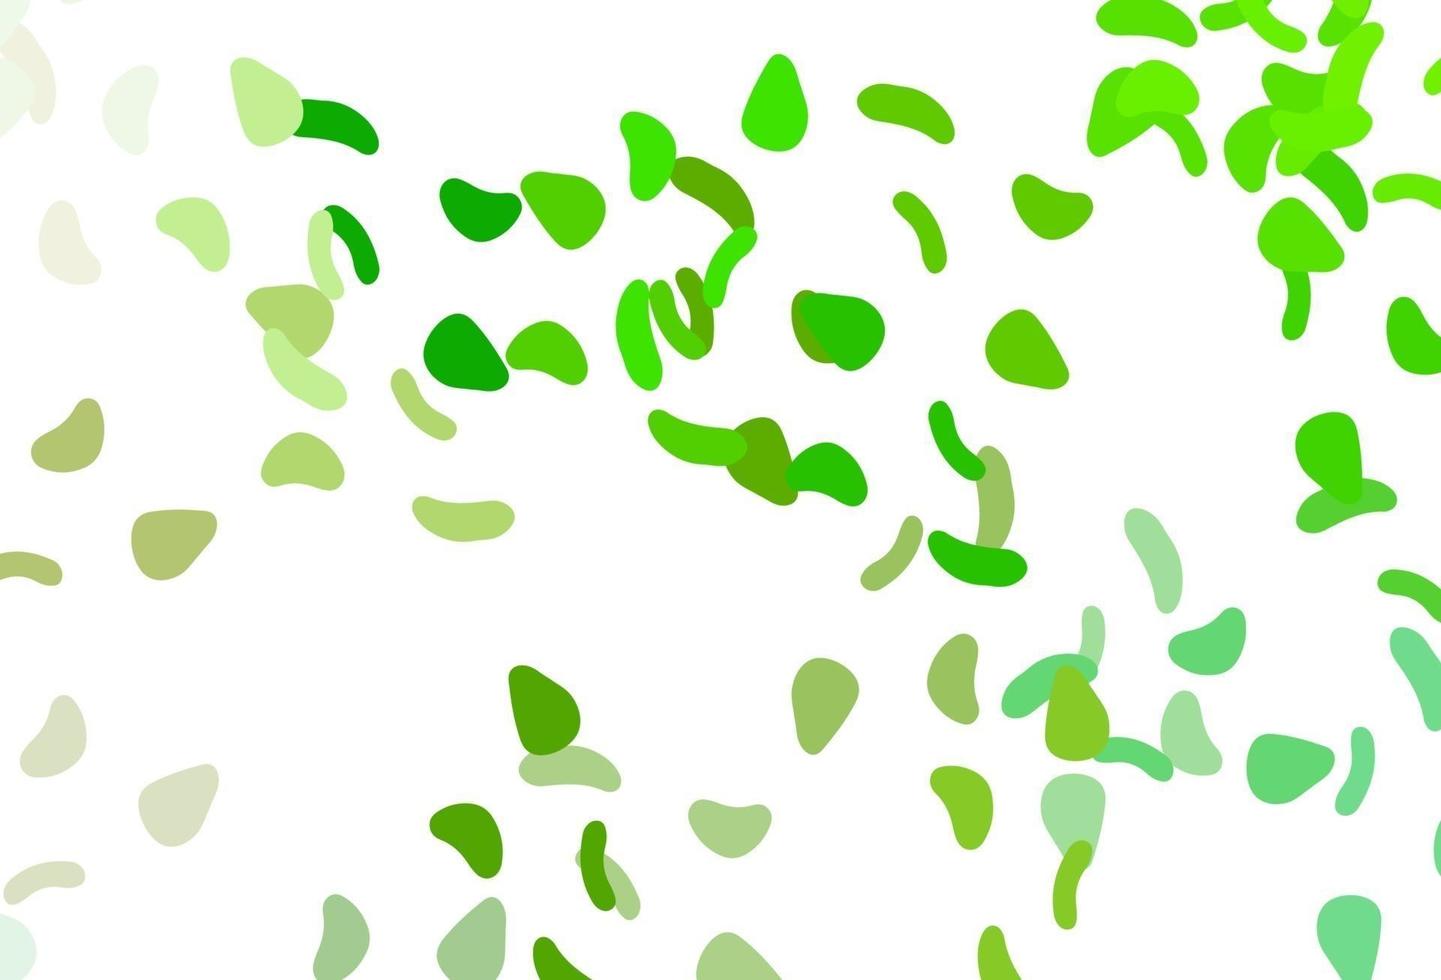 Light Green vector pattern with chaotic shapes.